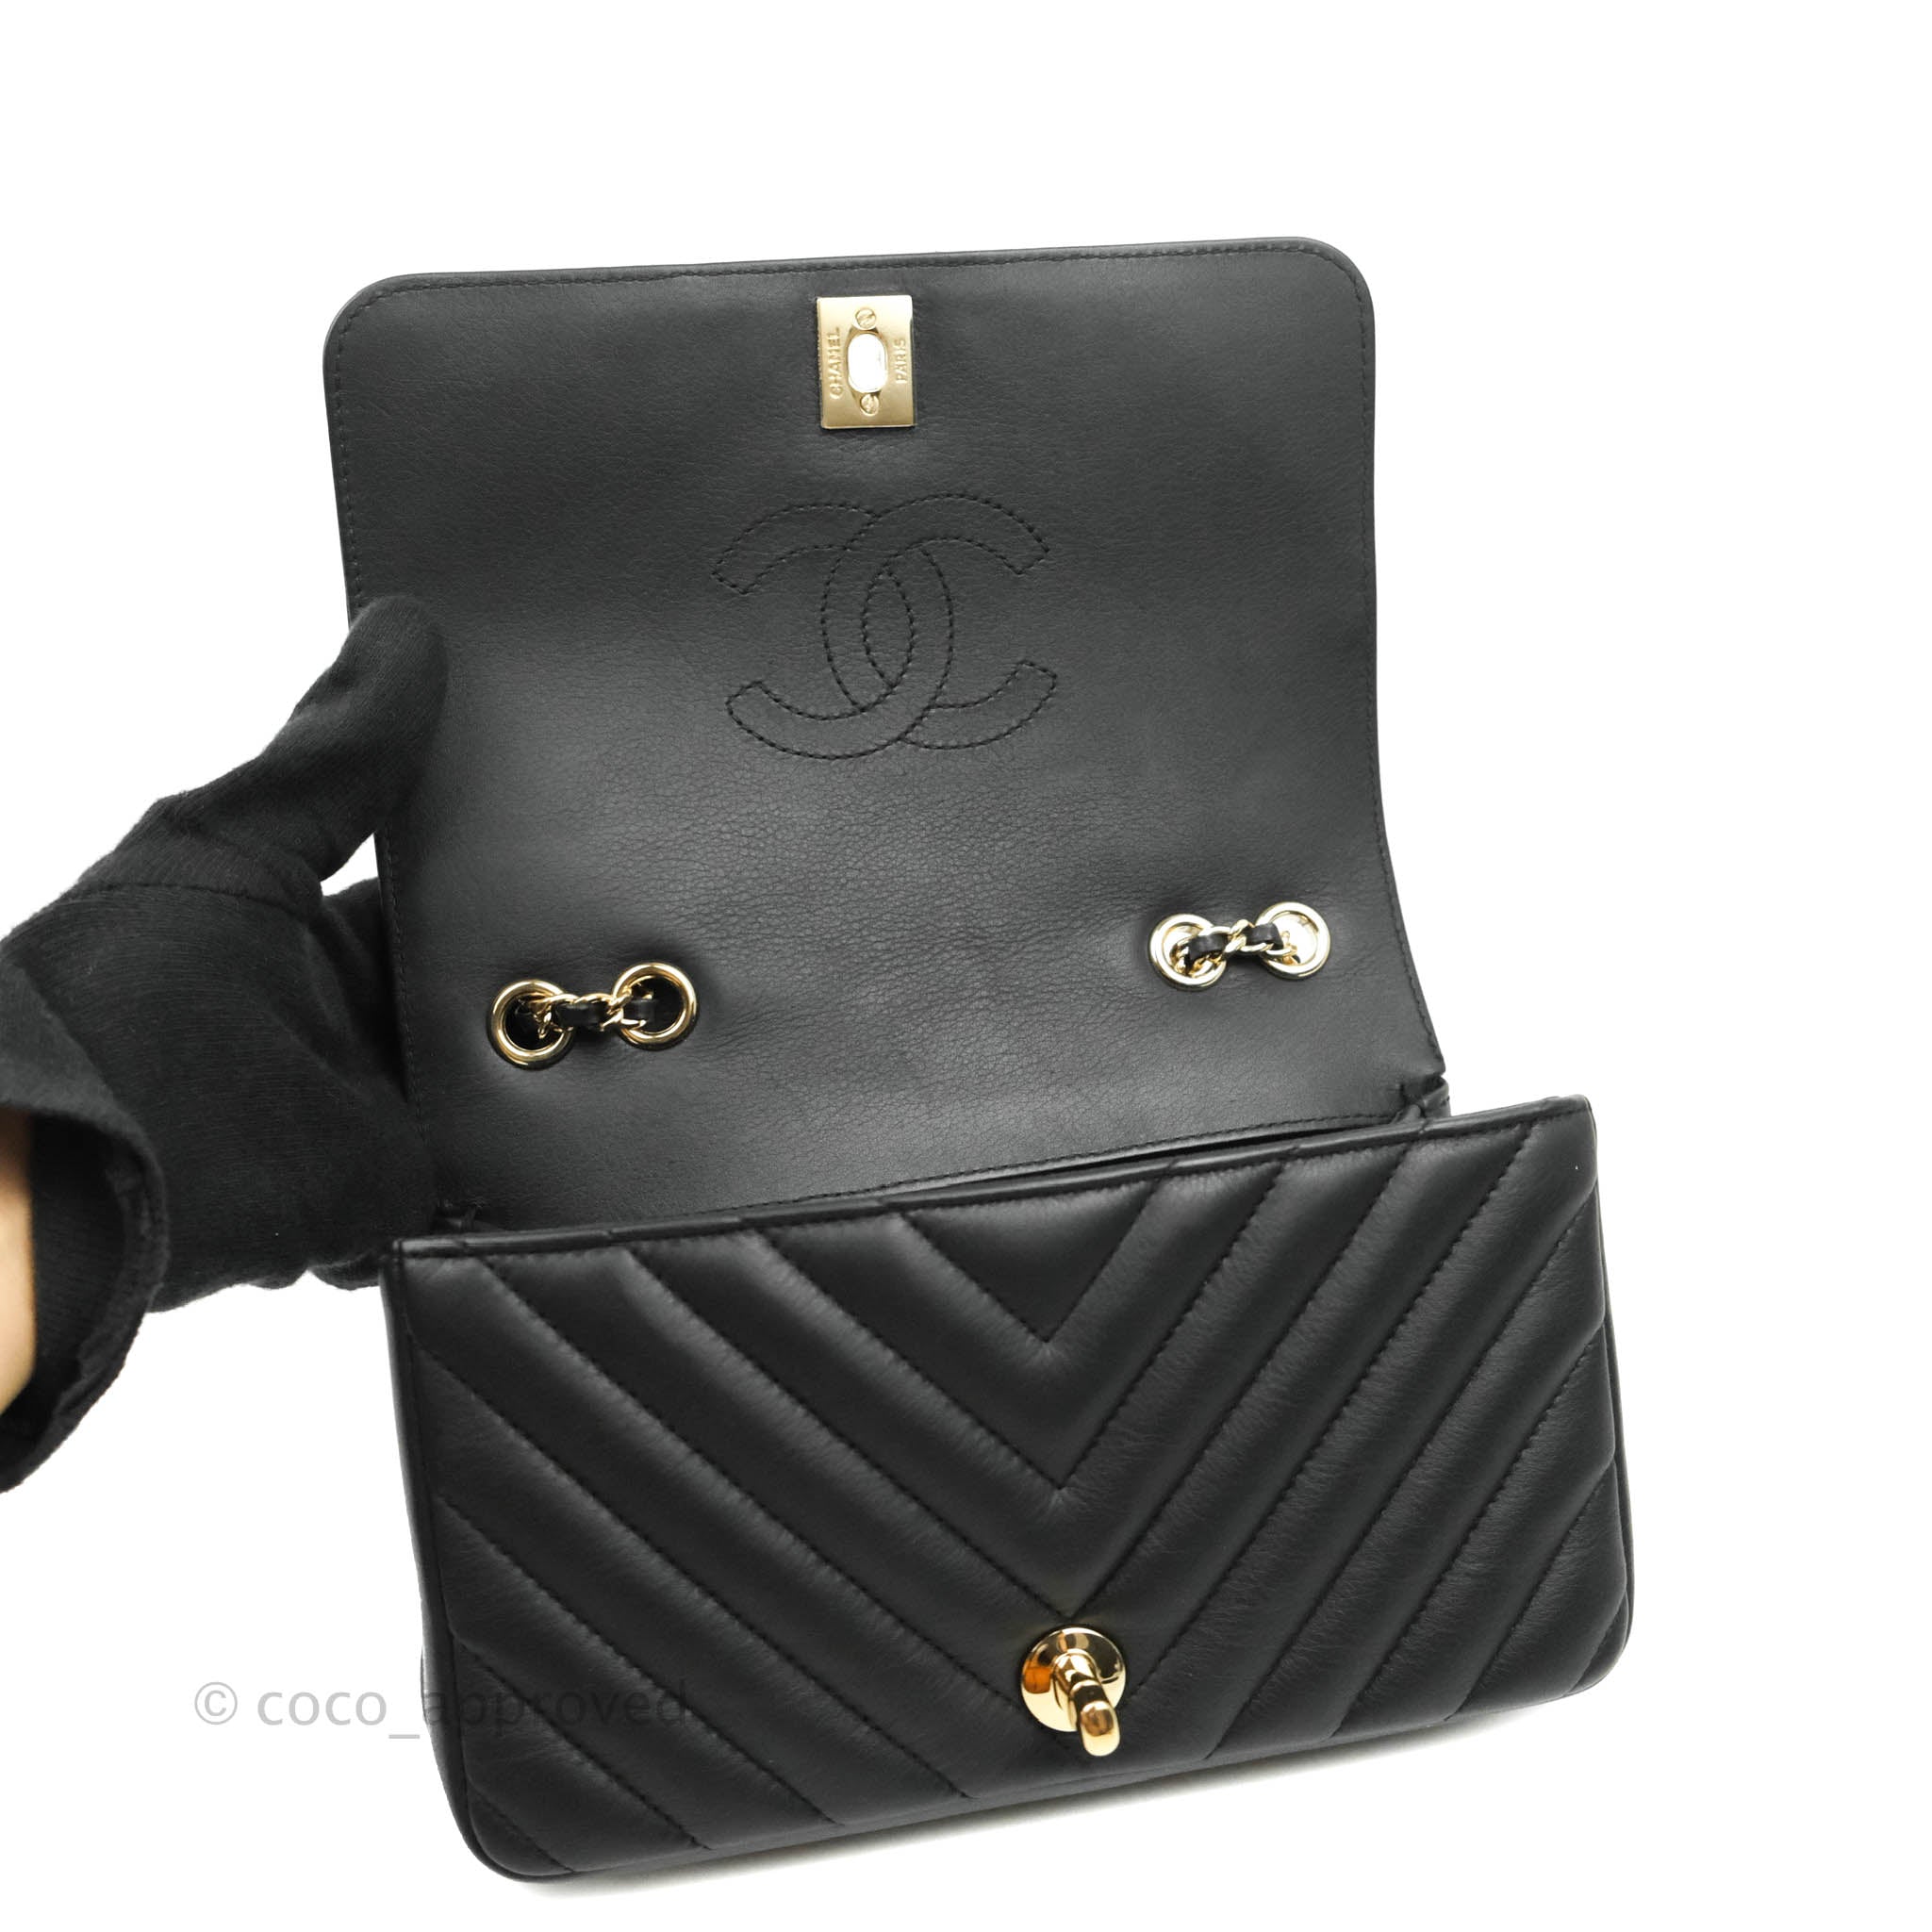 Small Trendy CC Flap Bag with Top Handle in Black Lambskin